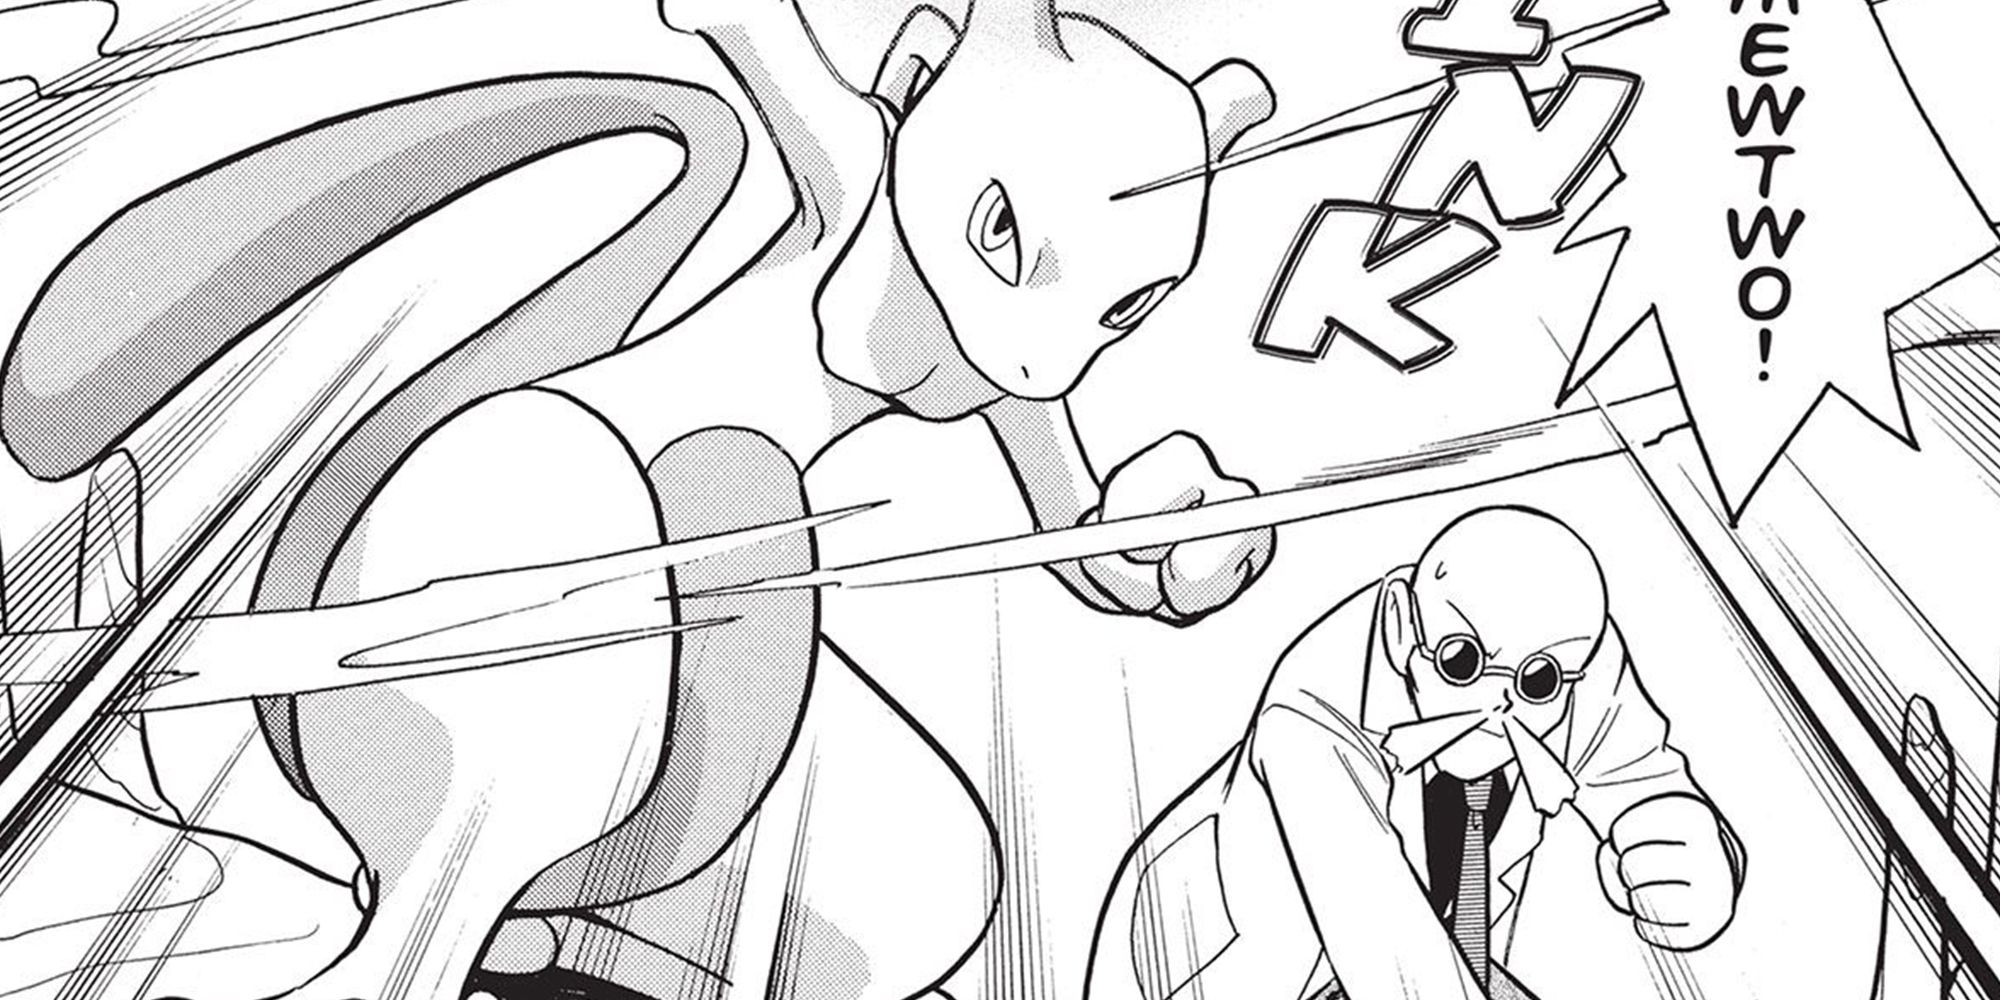 Blaine And Mewtwo In The Manga